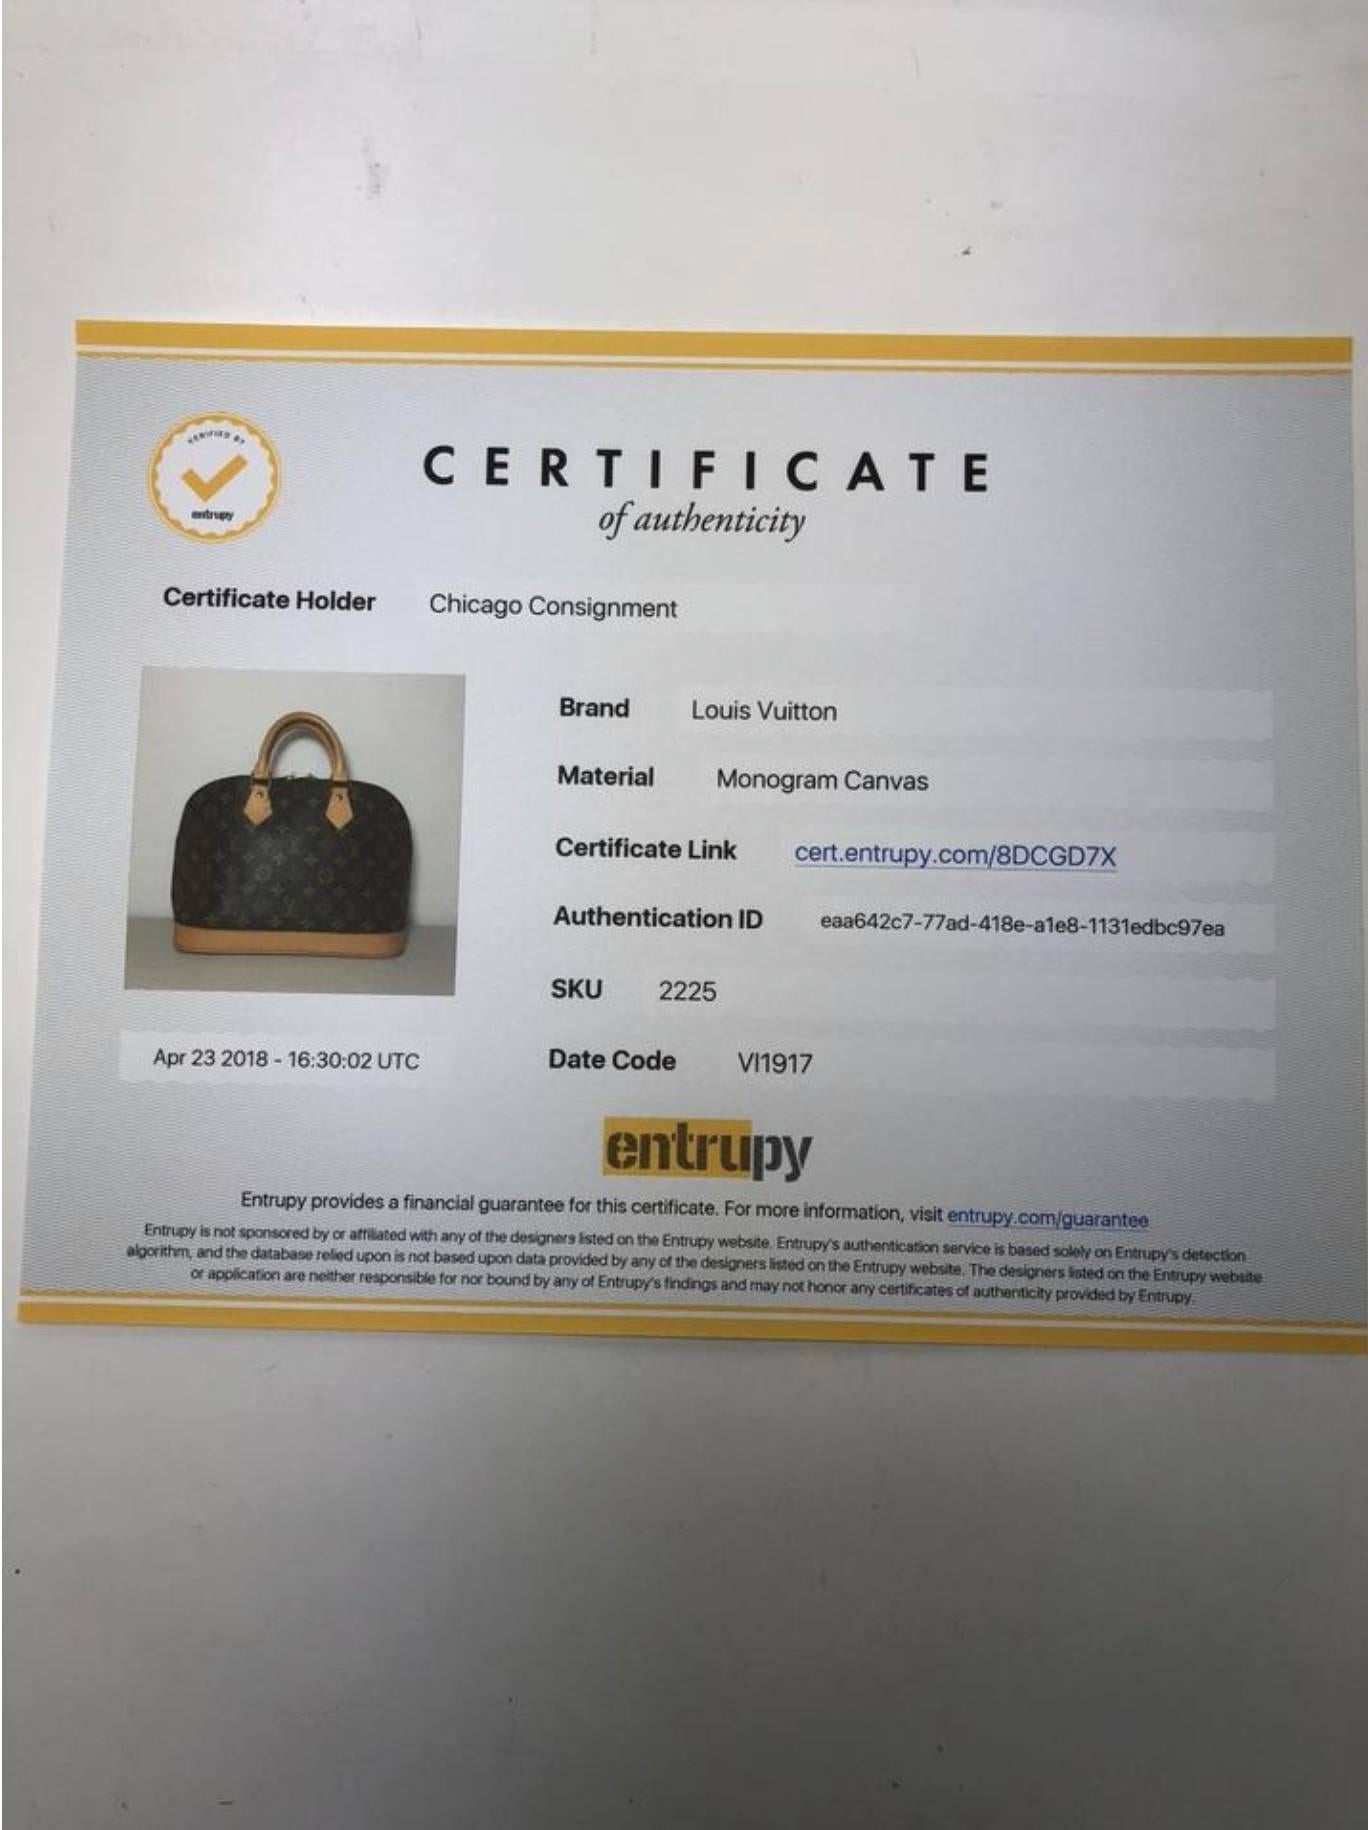 MODEL - Louis Vuitton Monogram Alma PM

CONDITION - Very Good. Clean and light vachette, light watermarks on base and lower trim. Small smudge on chap. No rips, holes, tears, stains or odors. Piece maintains original shape without cracks or creases.